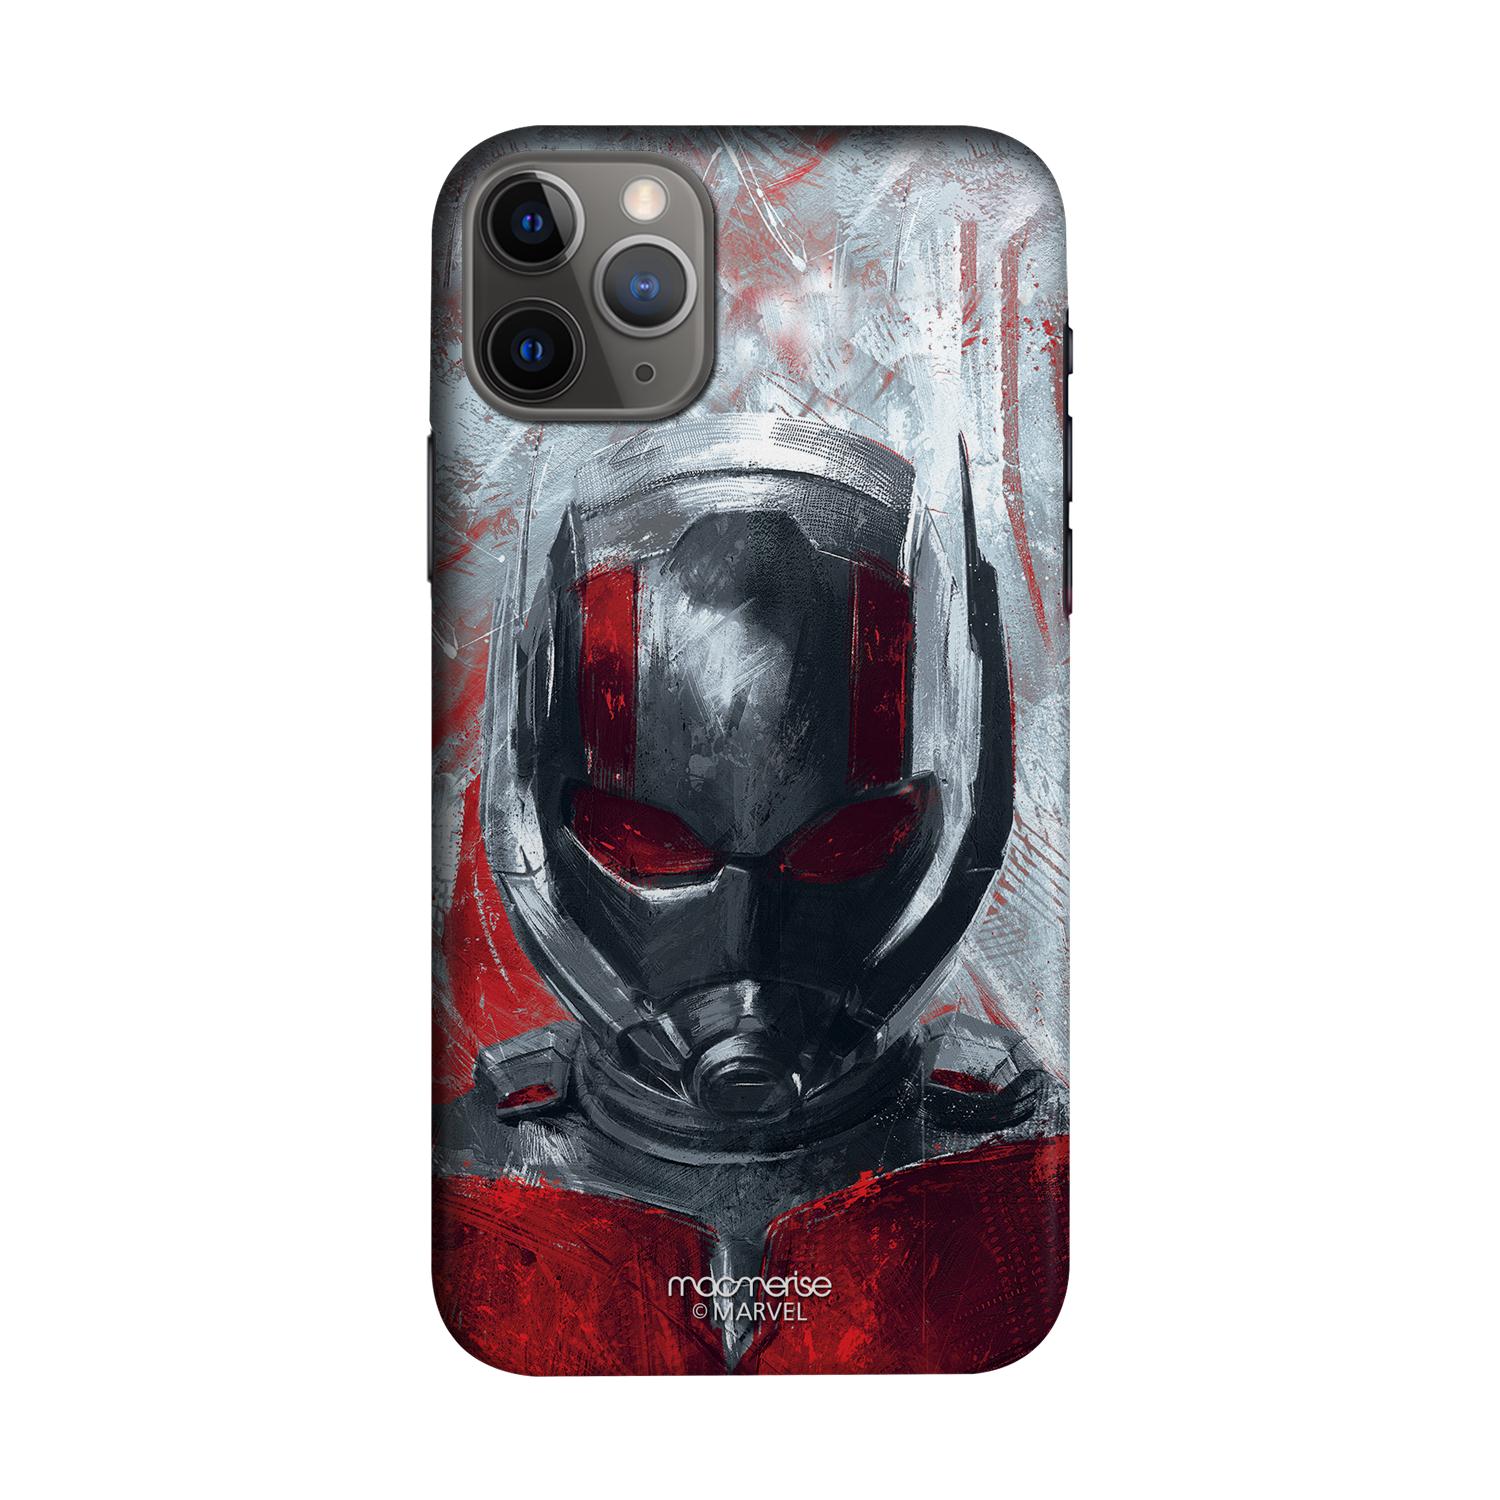 Buy Charcoal Art Antman - Sleek Phone Case for iPhone 11 Pro Max Online